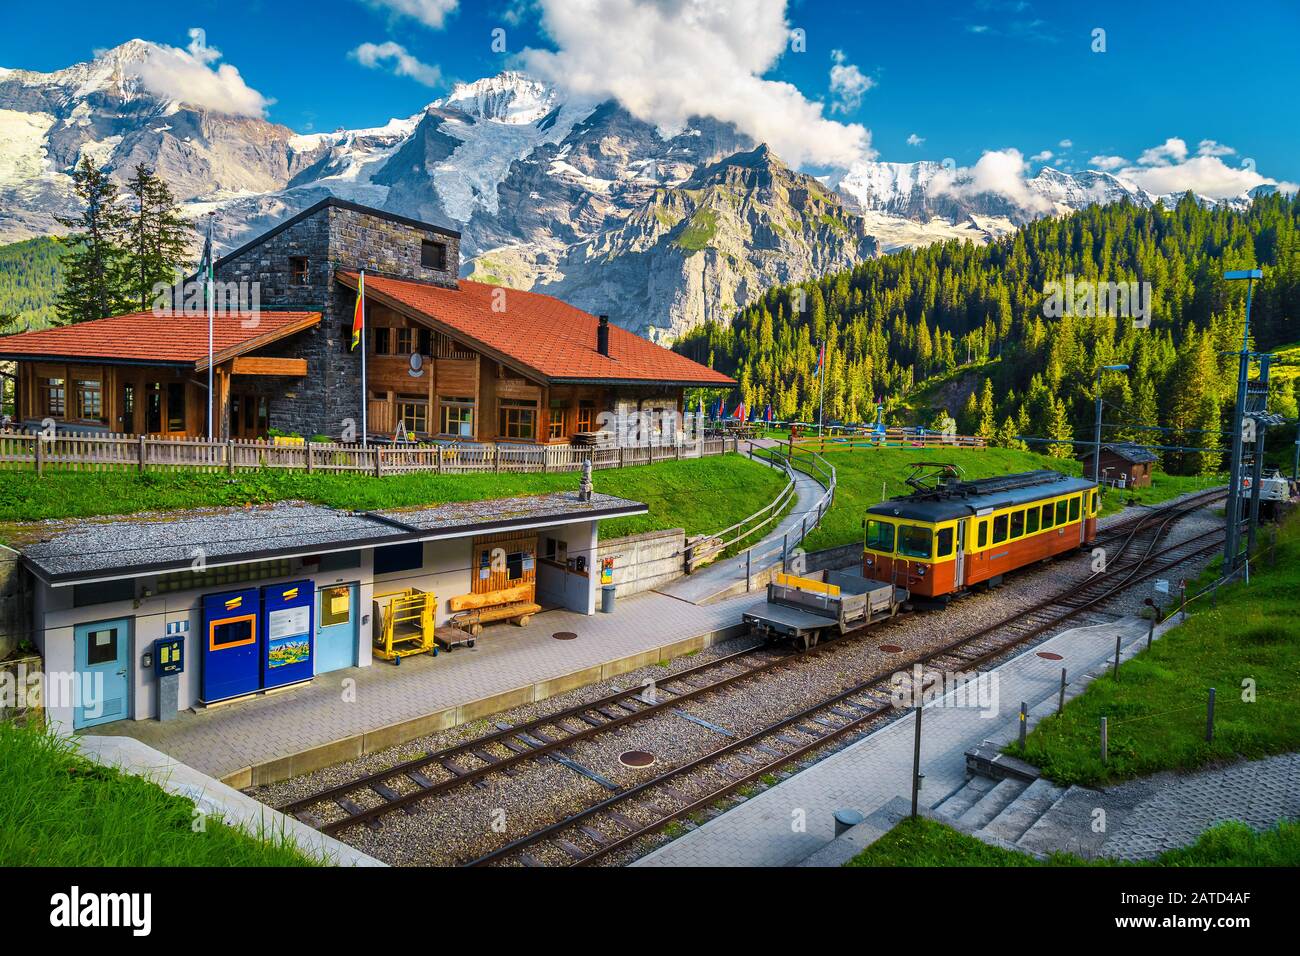 Beautiful mountain Winteregg railway station with cozy wooden restaurant and high snowy mountains in background. Retro tourist train in the train stat Stock Photo